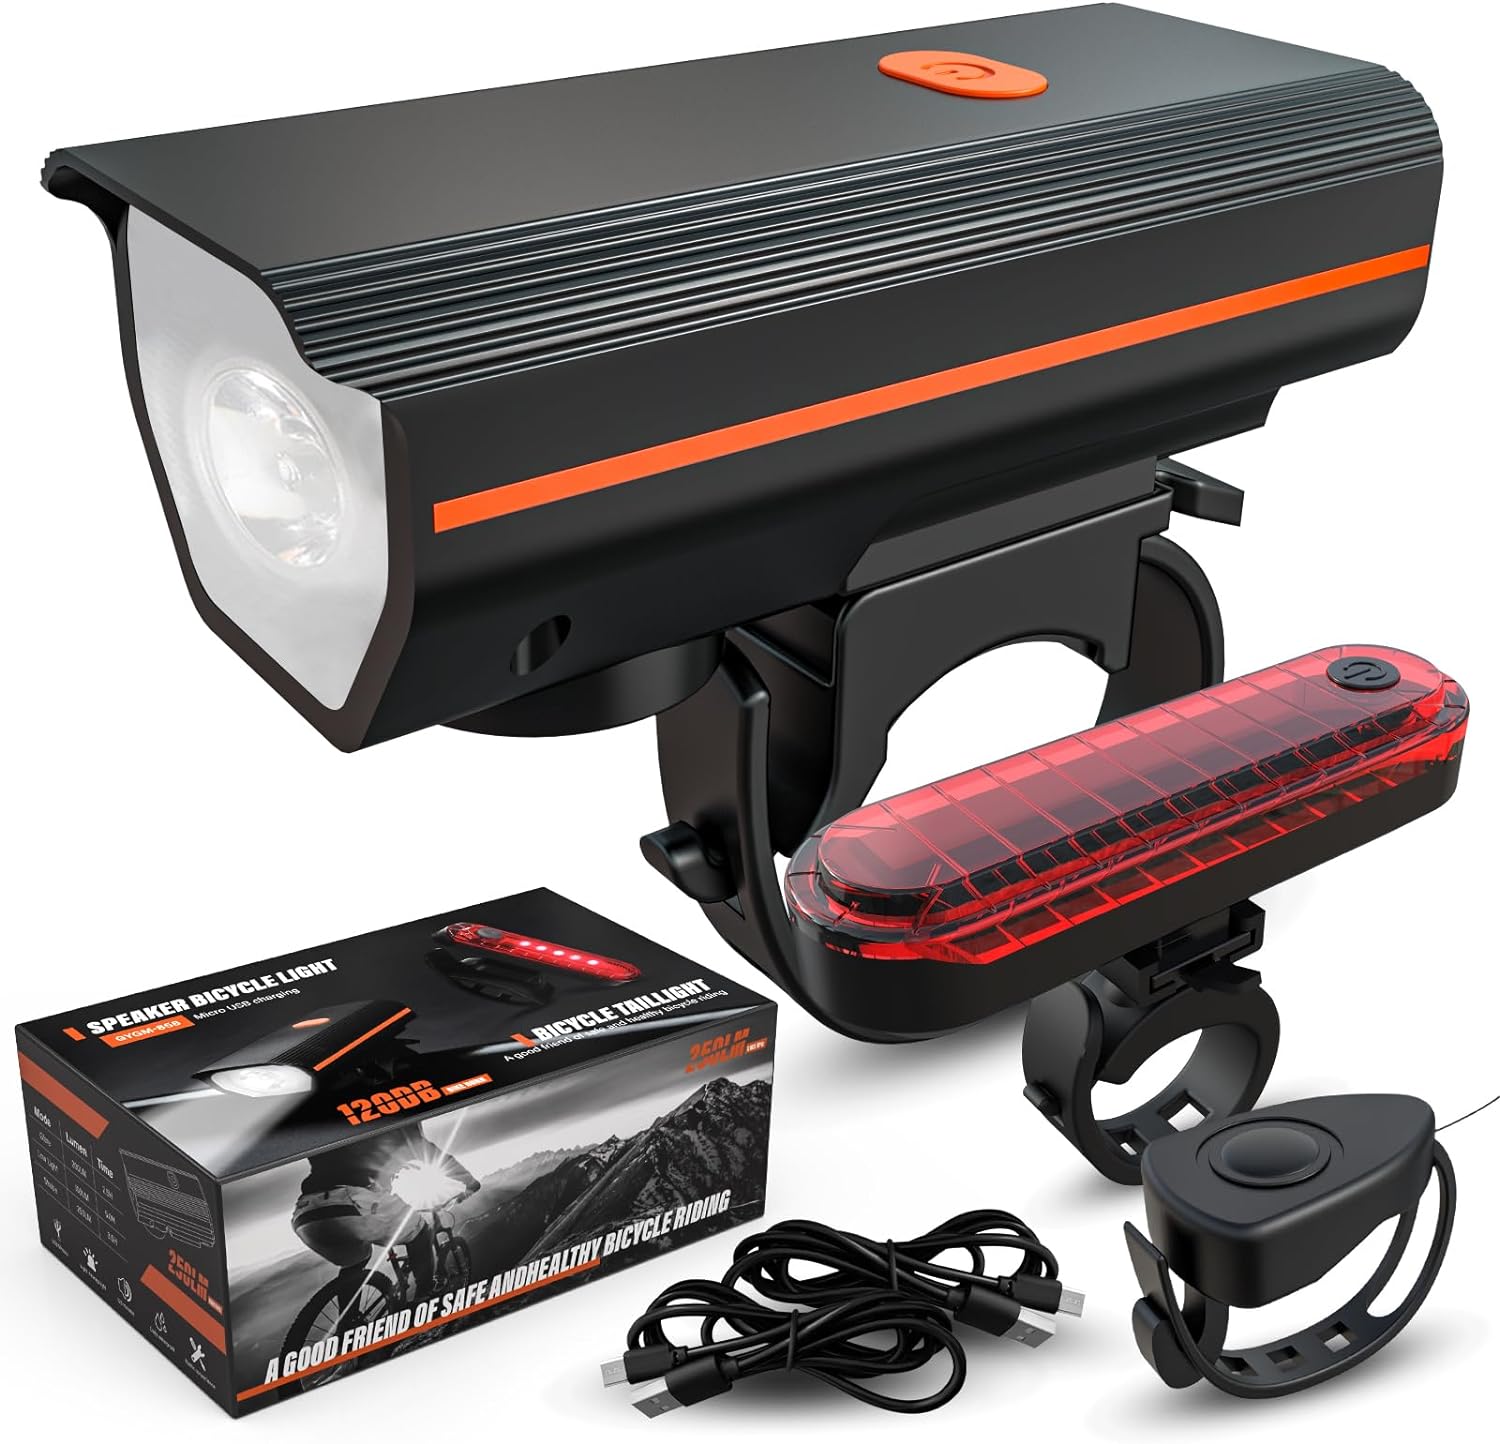 Rechargeable Bike Lights with Electric Bell